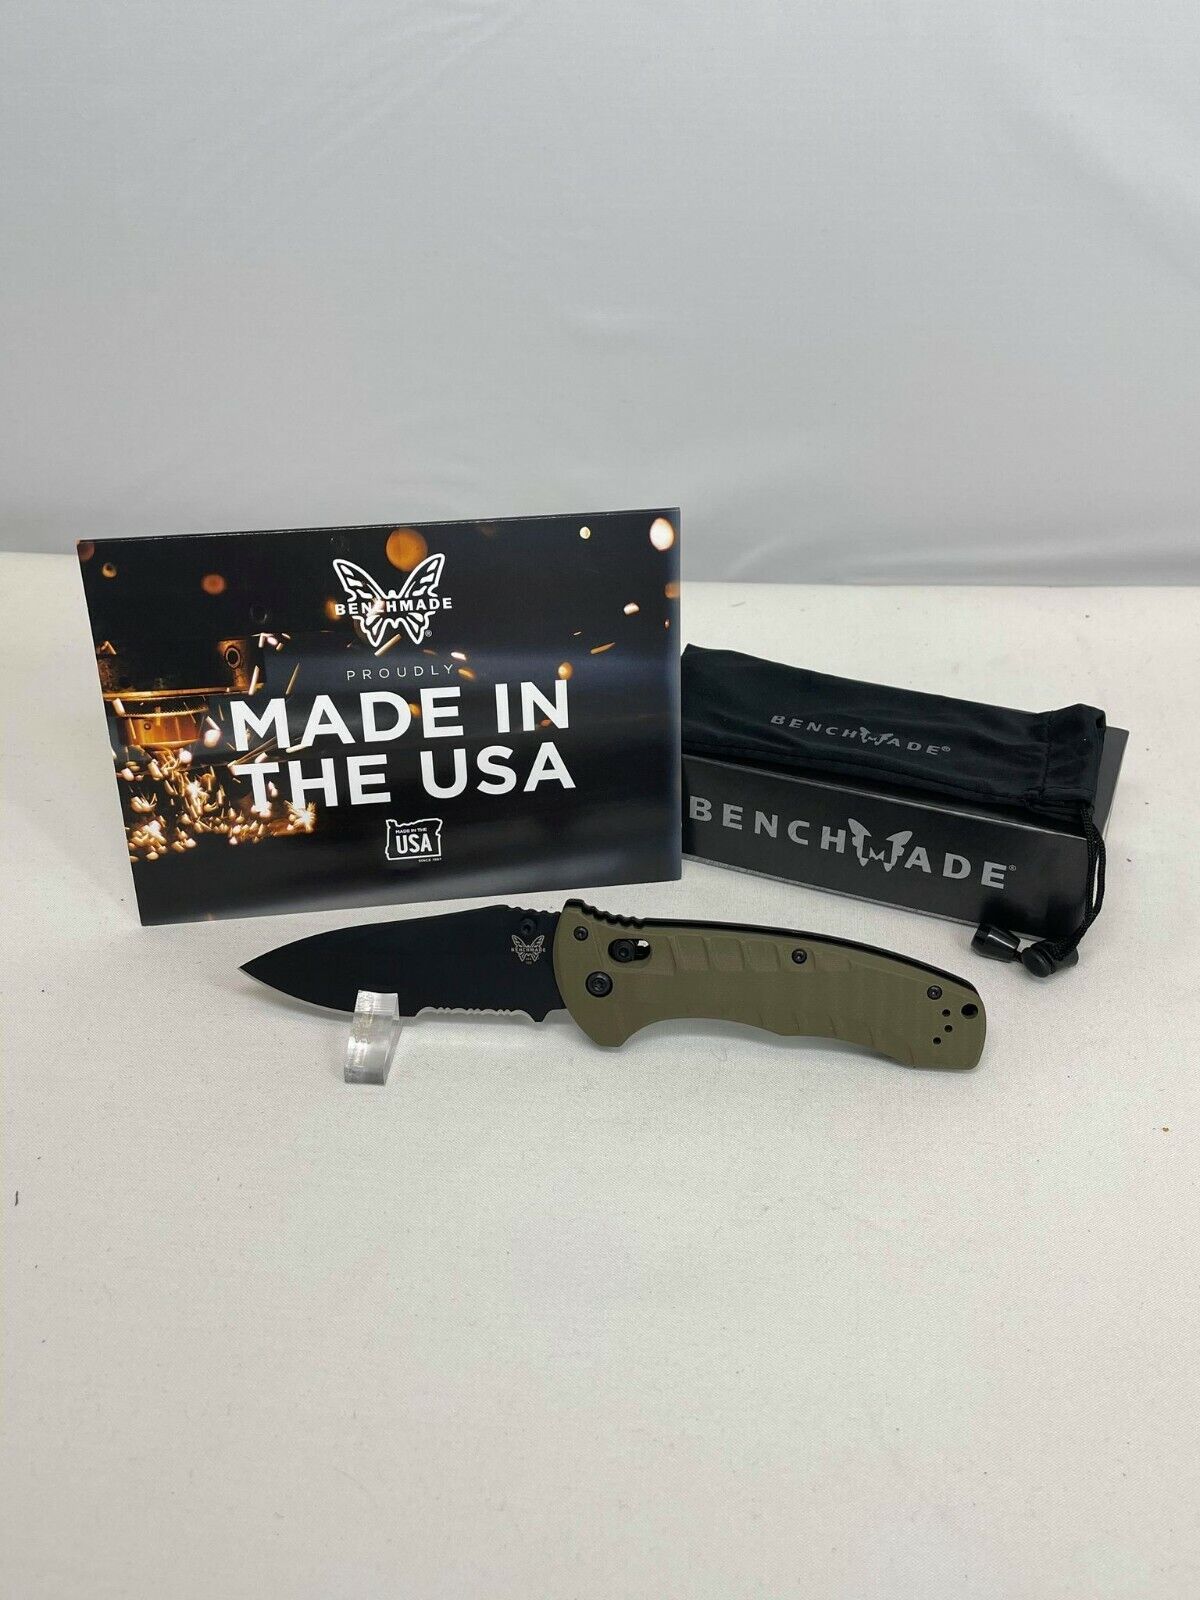 980SBK Turret - Benchmade Black Class Authorized Benchmade Dealer SALE ON 980SBK